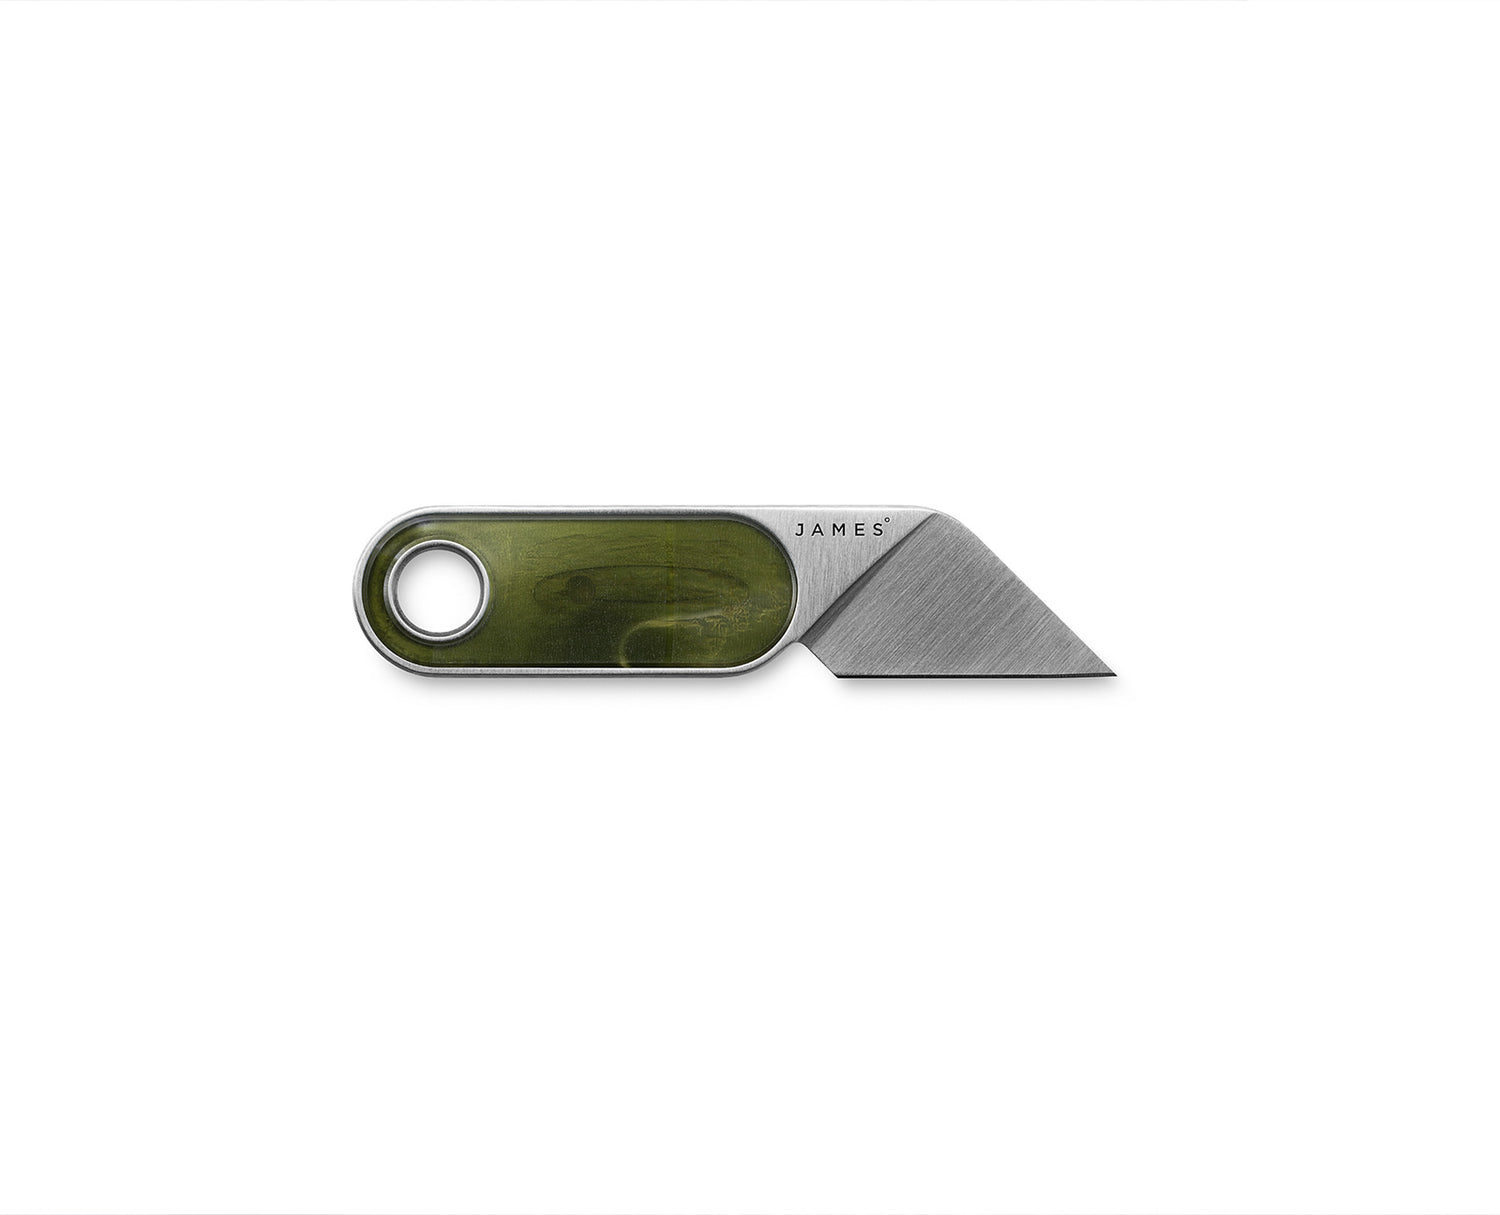 The Abbey knife with tie dye green handle and stainless steel blade.